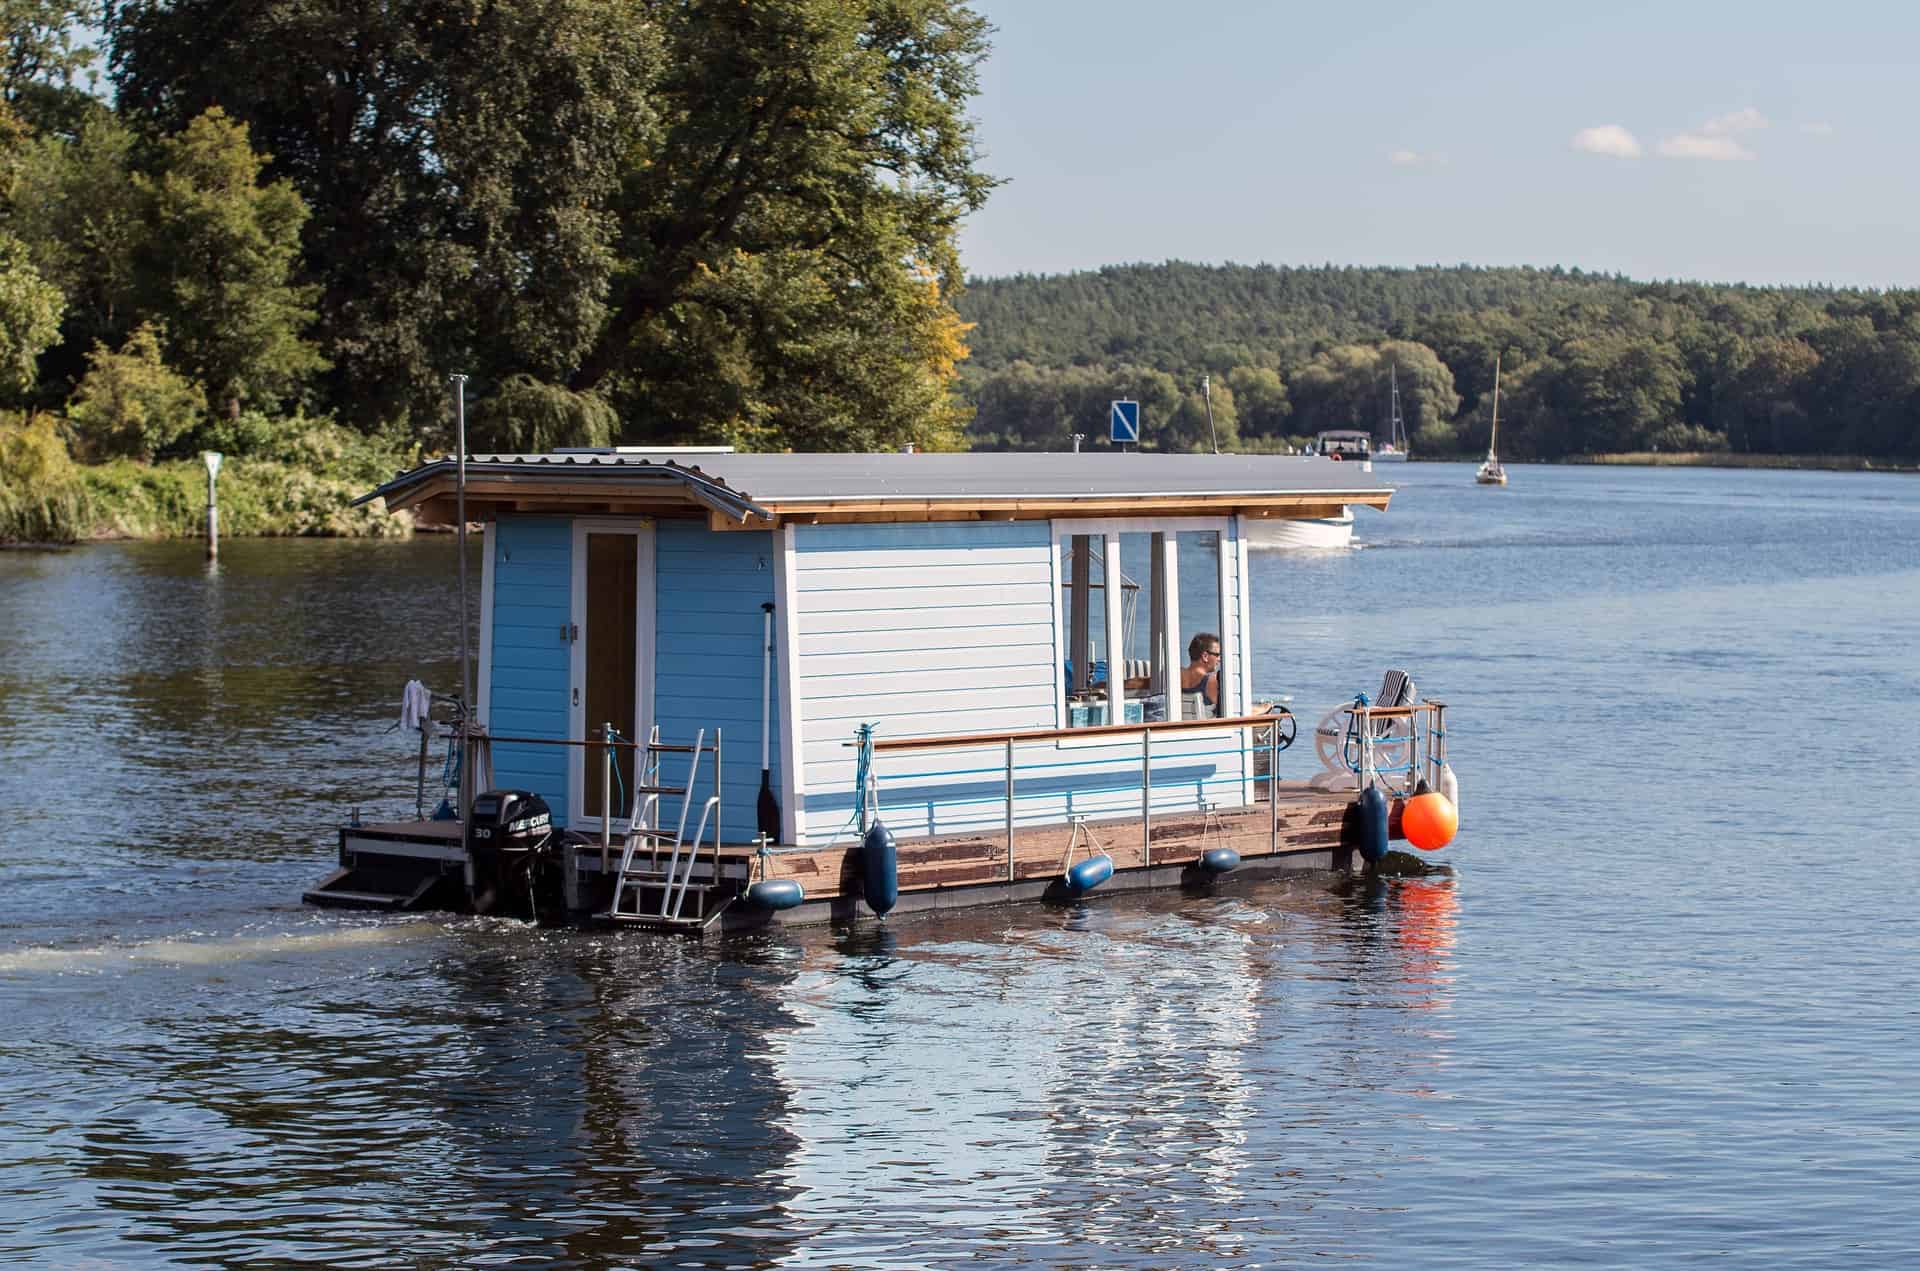 How Much Does a Houseboat Weigh?